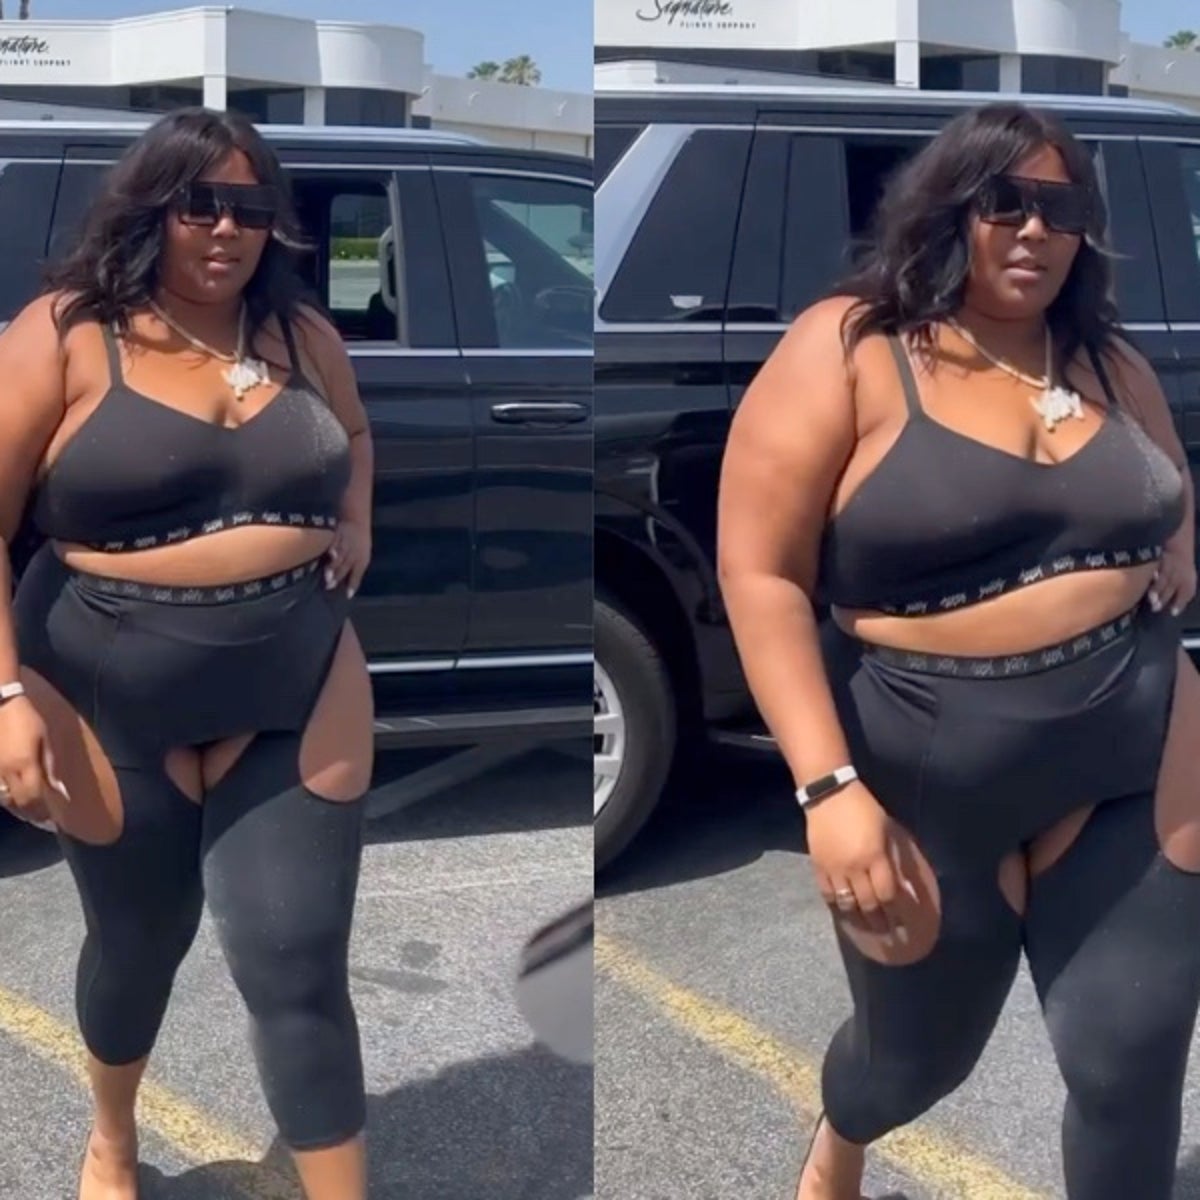 udsultet heroisk Holde Lizzo wears cut-out leggings from new shapewear line to excitement of fans:  'I can't wait to order' | The Independent